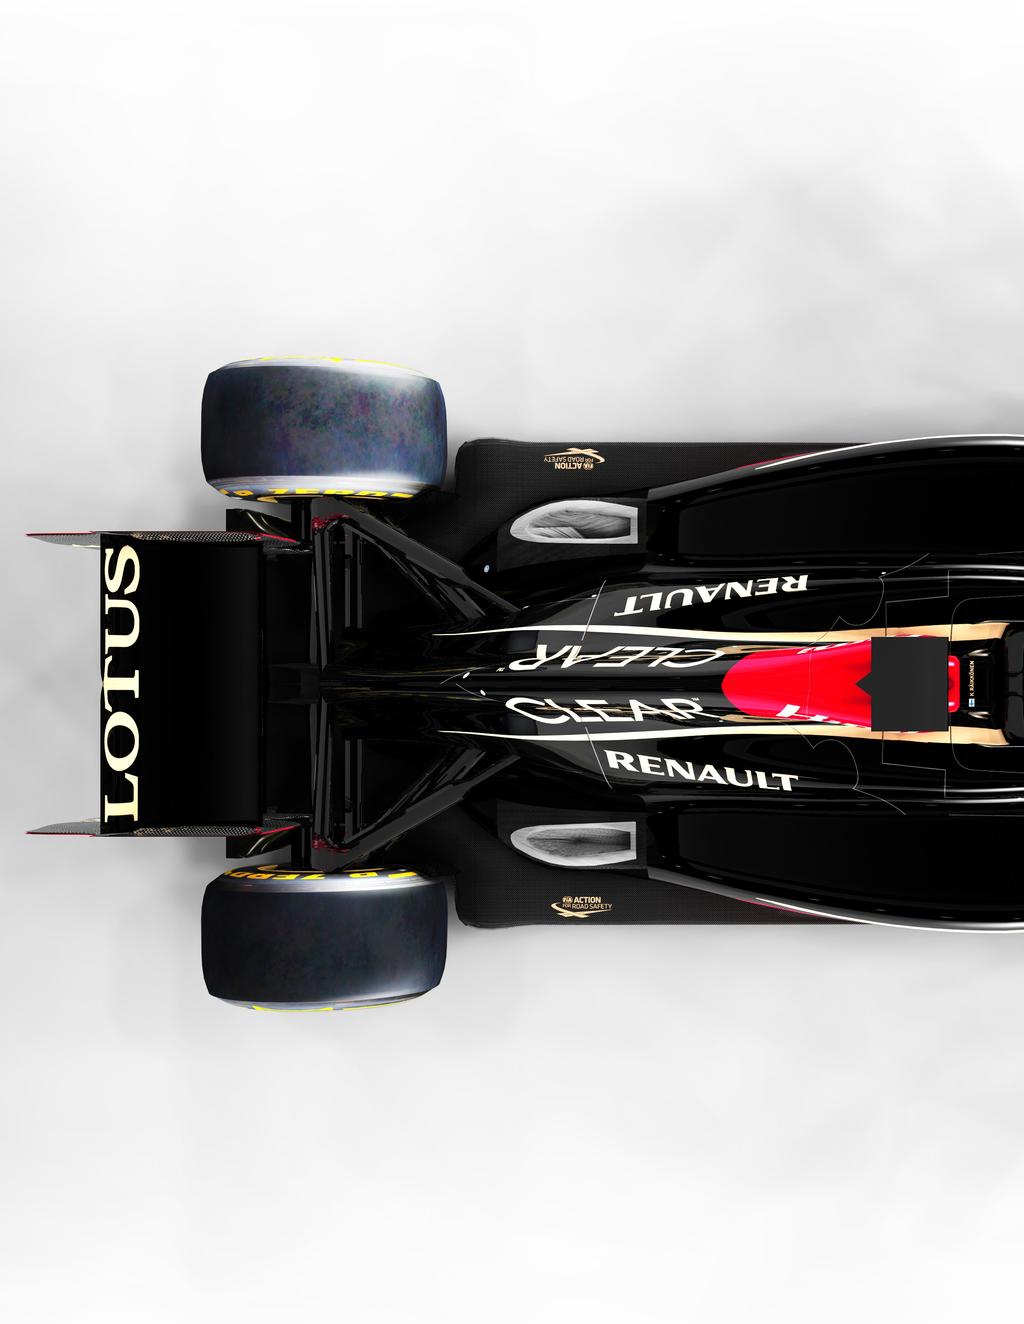 THE E21 Lotus F1 s Technical Director James Allison has made it clear that they are entering the 2013 championship with high expectations.